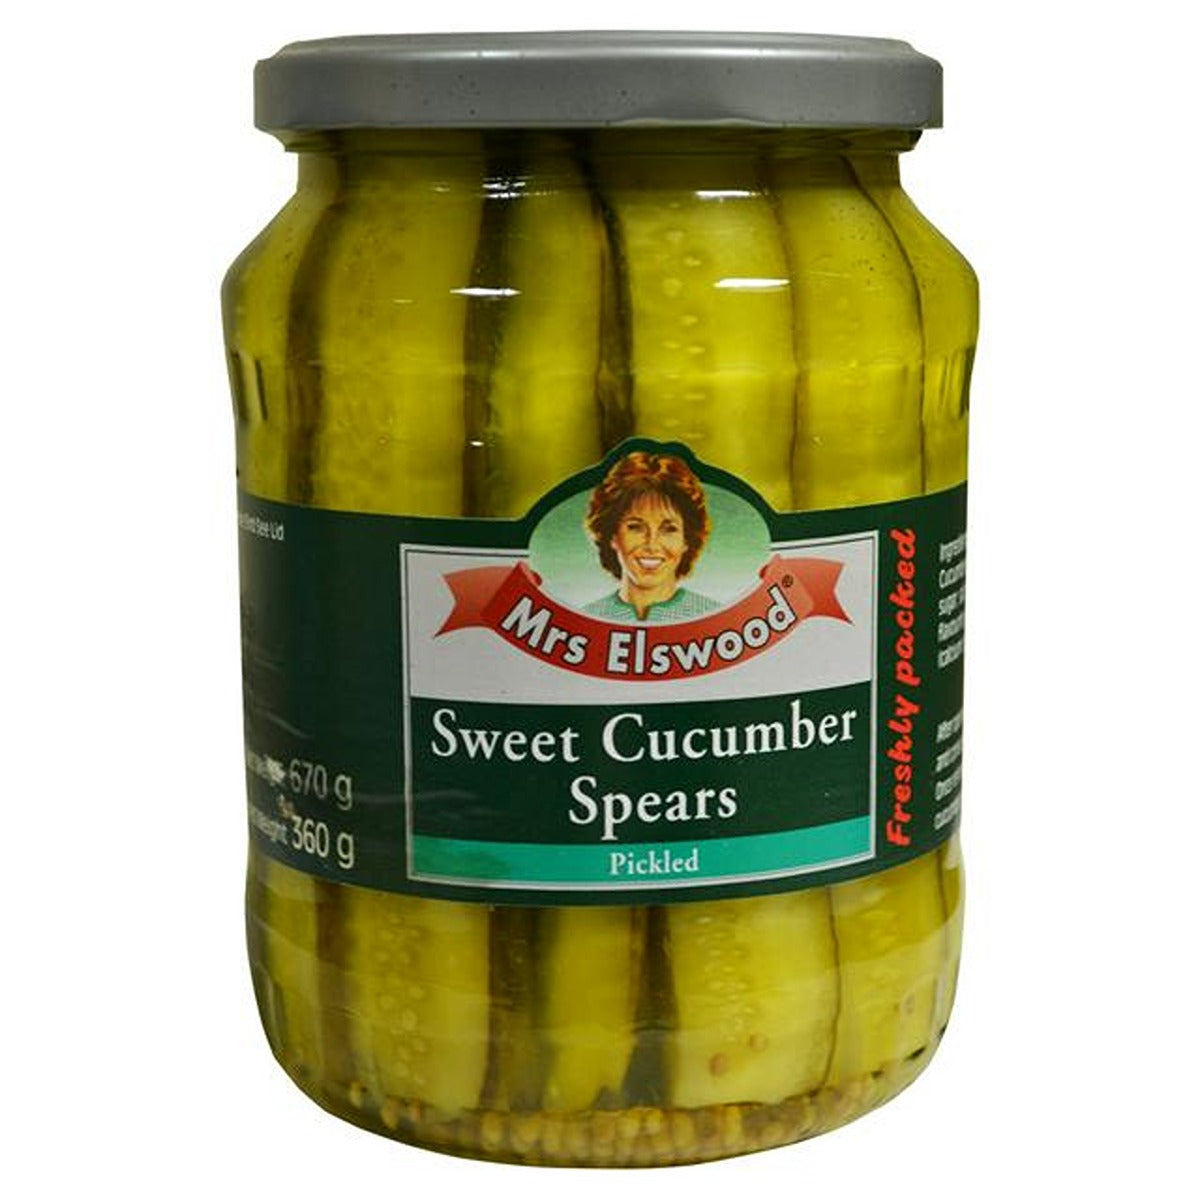 Mrs Elswood - Sweet Cucumbers Spears - 670g - Continental Food Store